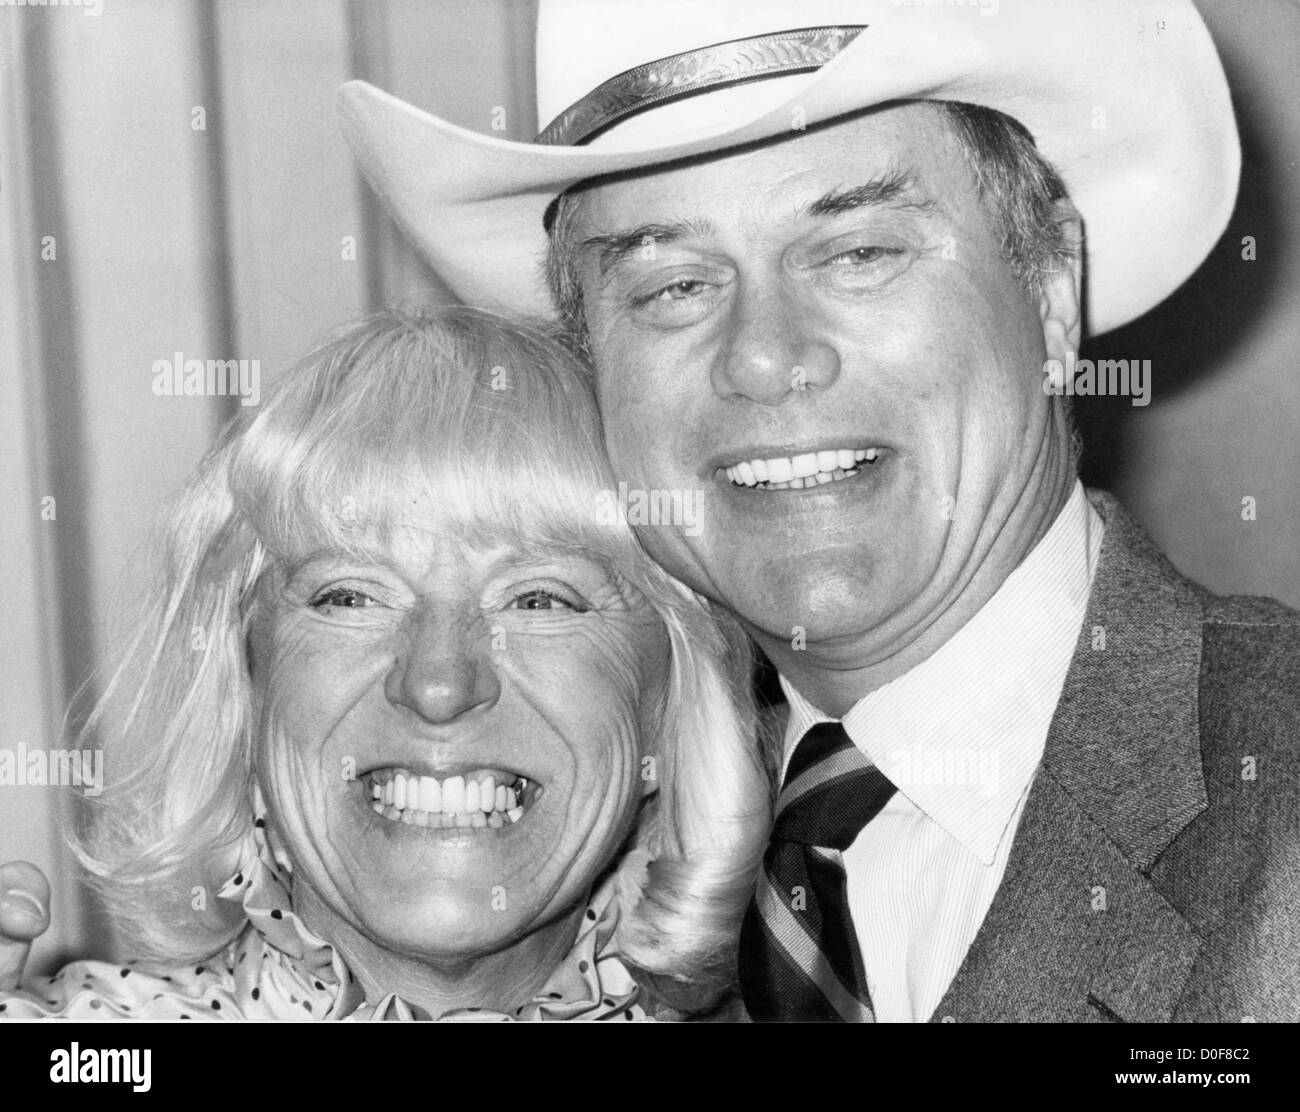 Nov. 23, 2012 - Actor, writer producer Larry Hagman, who created one of American television's most supreme villains in the conniving, amoral oilman J.R. Ewing of "Dallas," has died, He was 81. Hagman died at a Dallas hospital of complications from his battle with throat cancer, quoting a statement from his family. He had suffered from liver cancer and cirrhosis of the liver in the 1990s after decades of drinking. PICTURED: Mar. 21, 1980 - London, England, U.K. - American television actor, producer and director, LARRY HAGMAN with his MAJ AXELSSON. (Credit Image: © KEYSTONE Pictures USA/ZUMAPRES Stock Photo